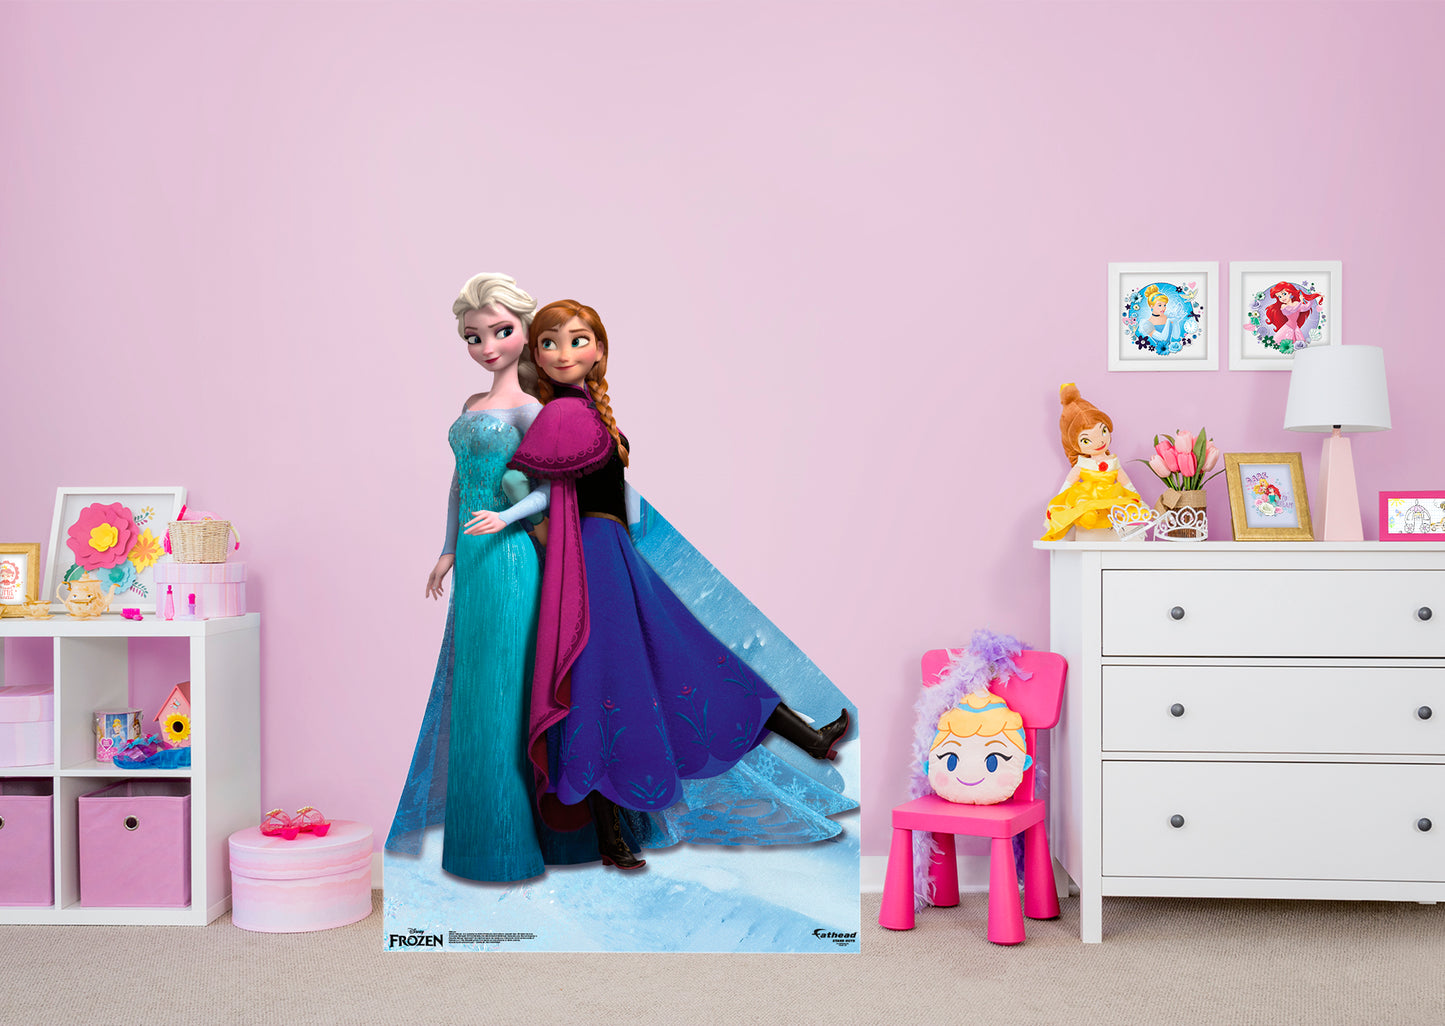 Frozen:  Sisters   Foam Core Cutout  - Officially Licensed Disney    Stand Out